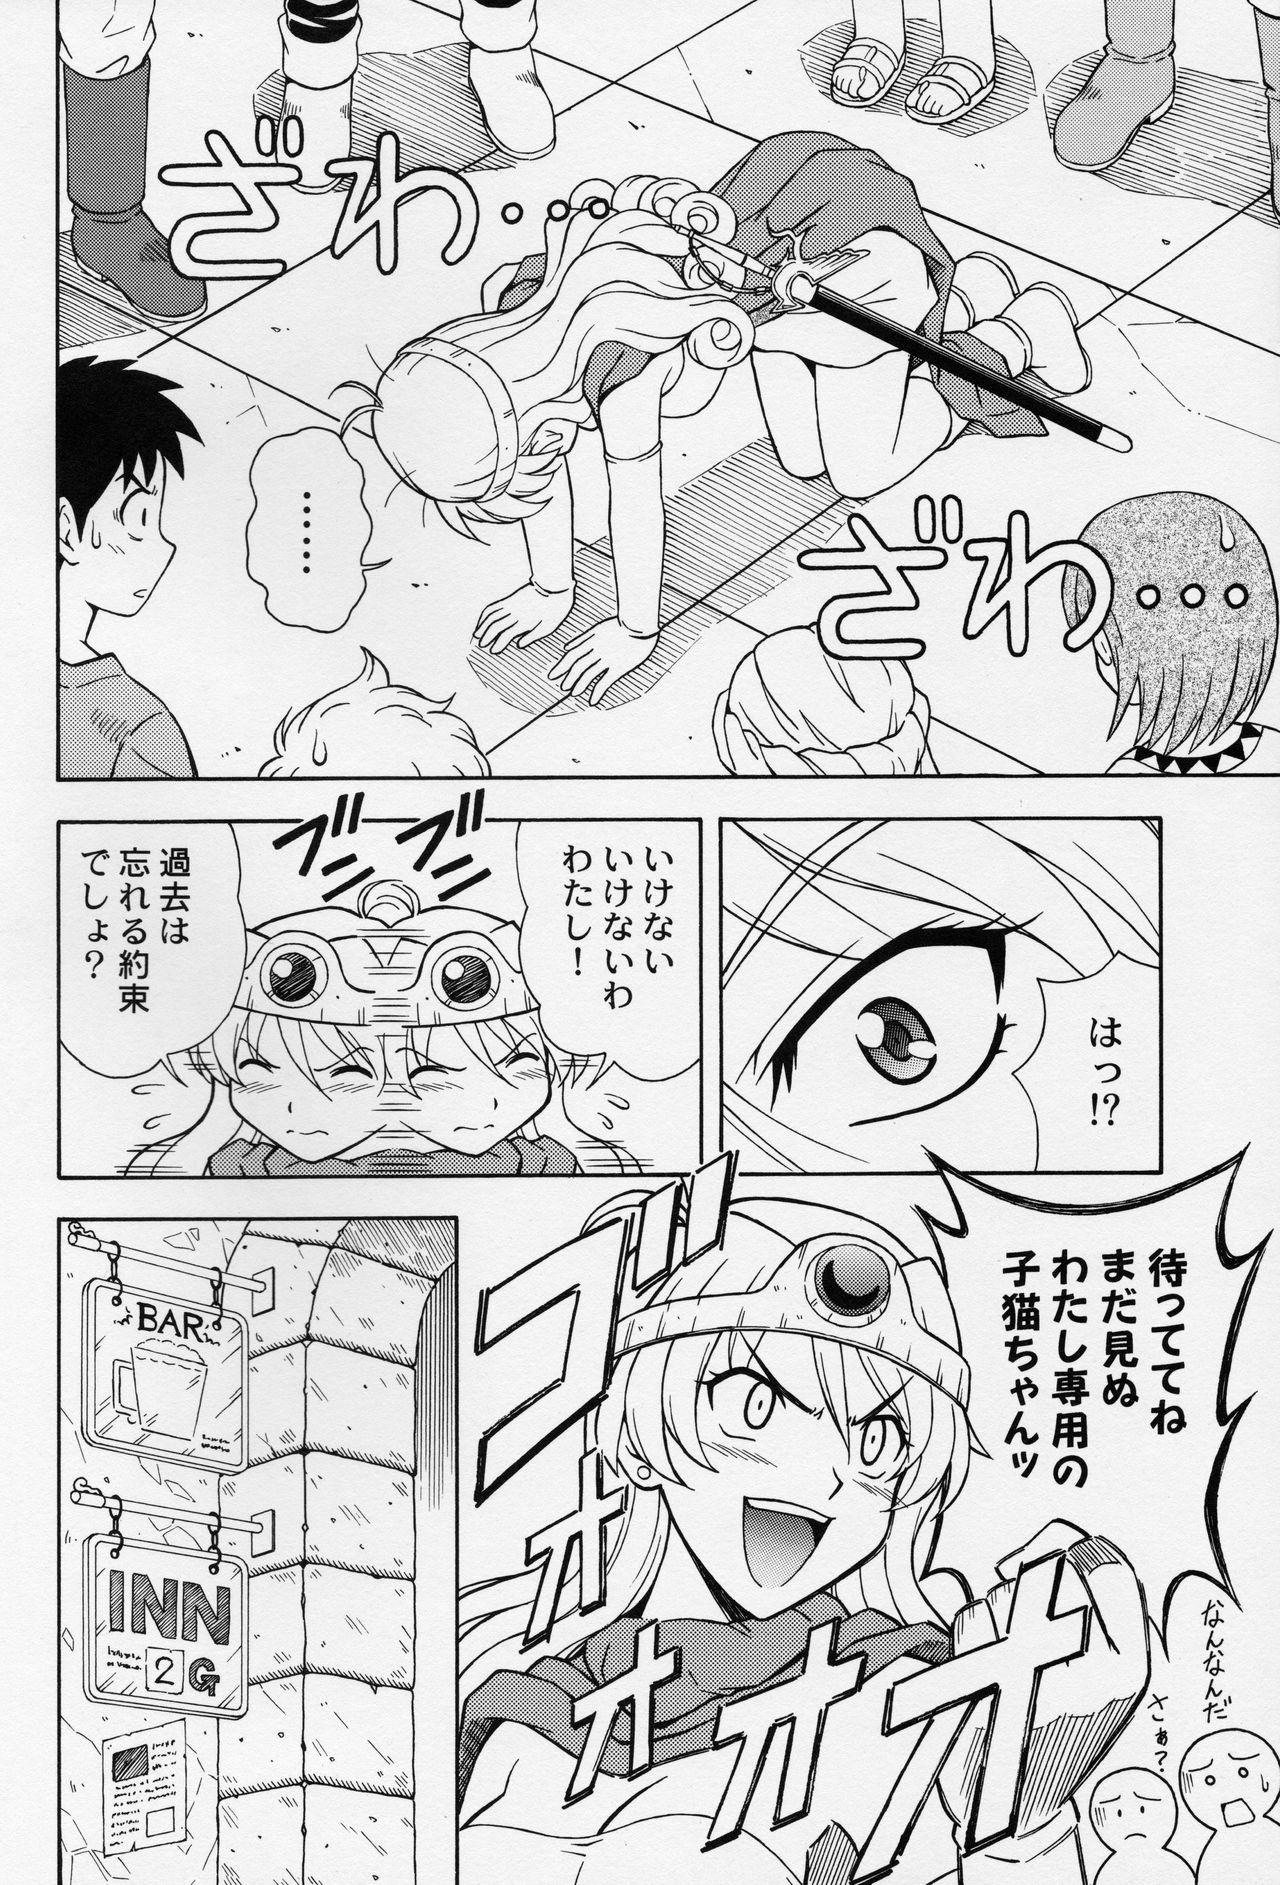 Candid Moe Moe Quest Z Vol. 2 - Dragon quest iii Swallowing - Page 9